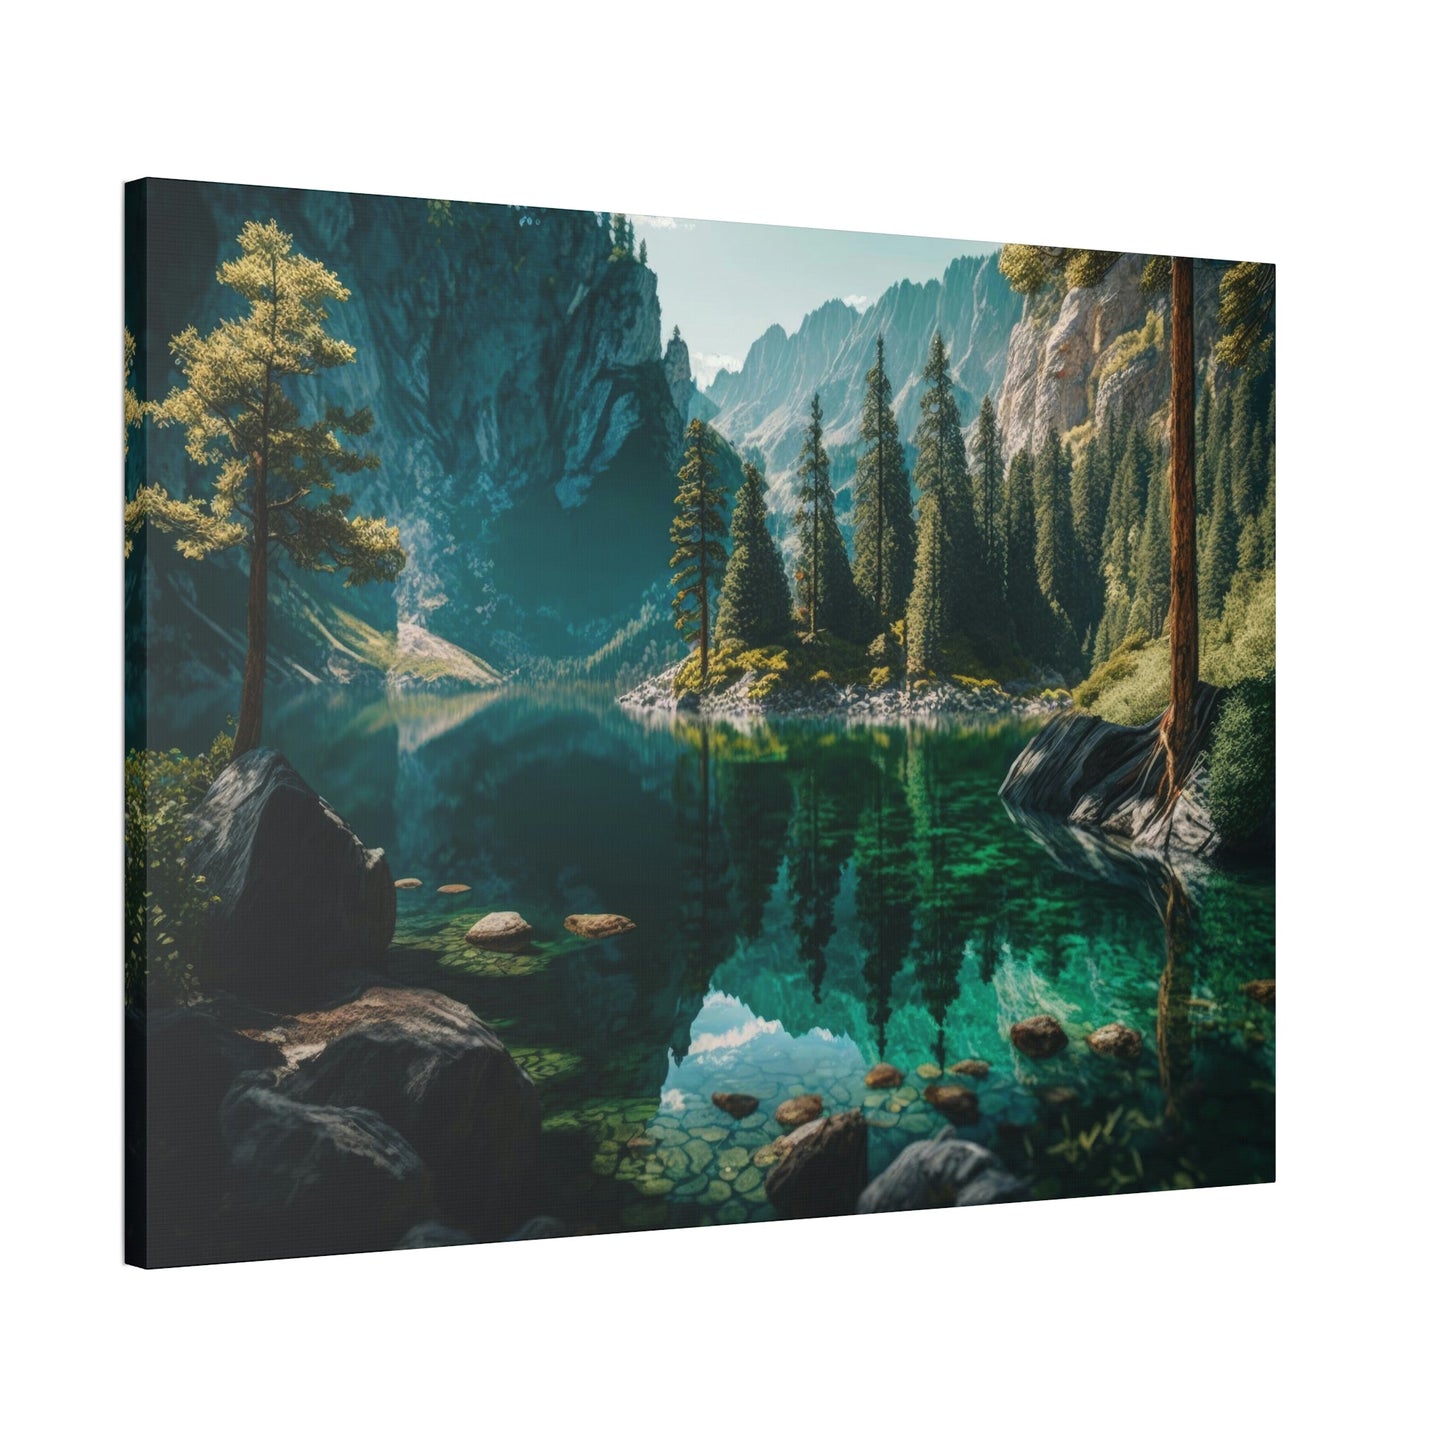 Flowing Beauty: Wall Art and Canvas Print of Lakes and Rivers